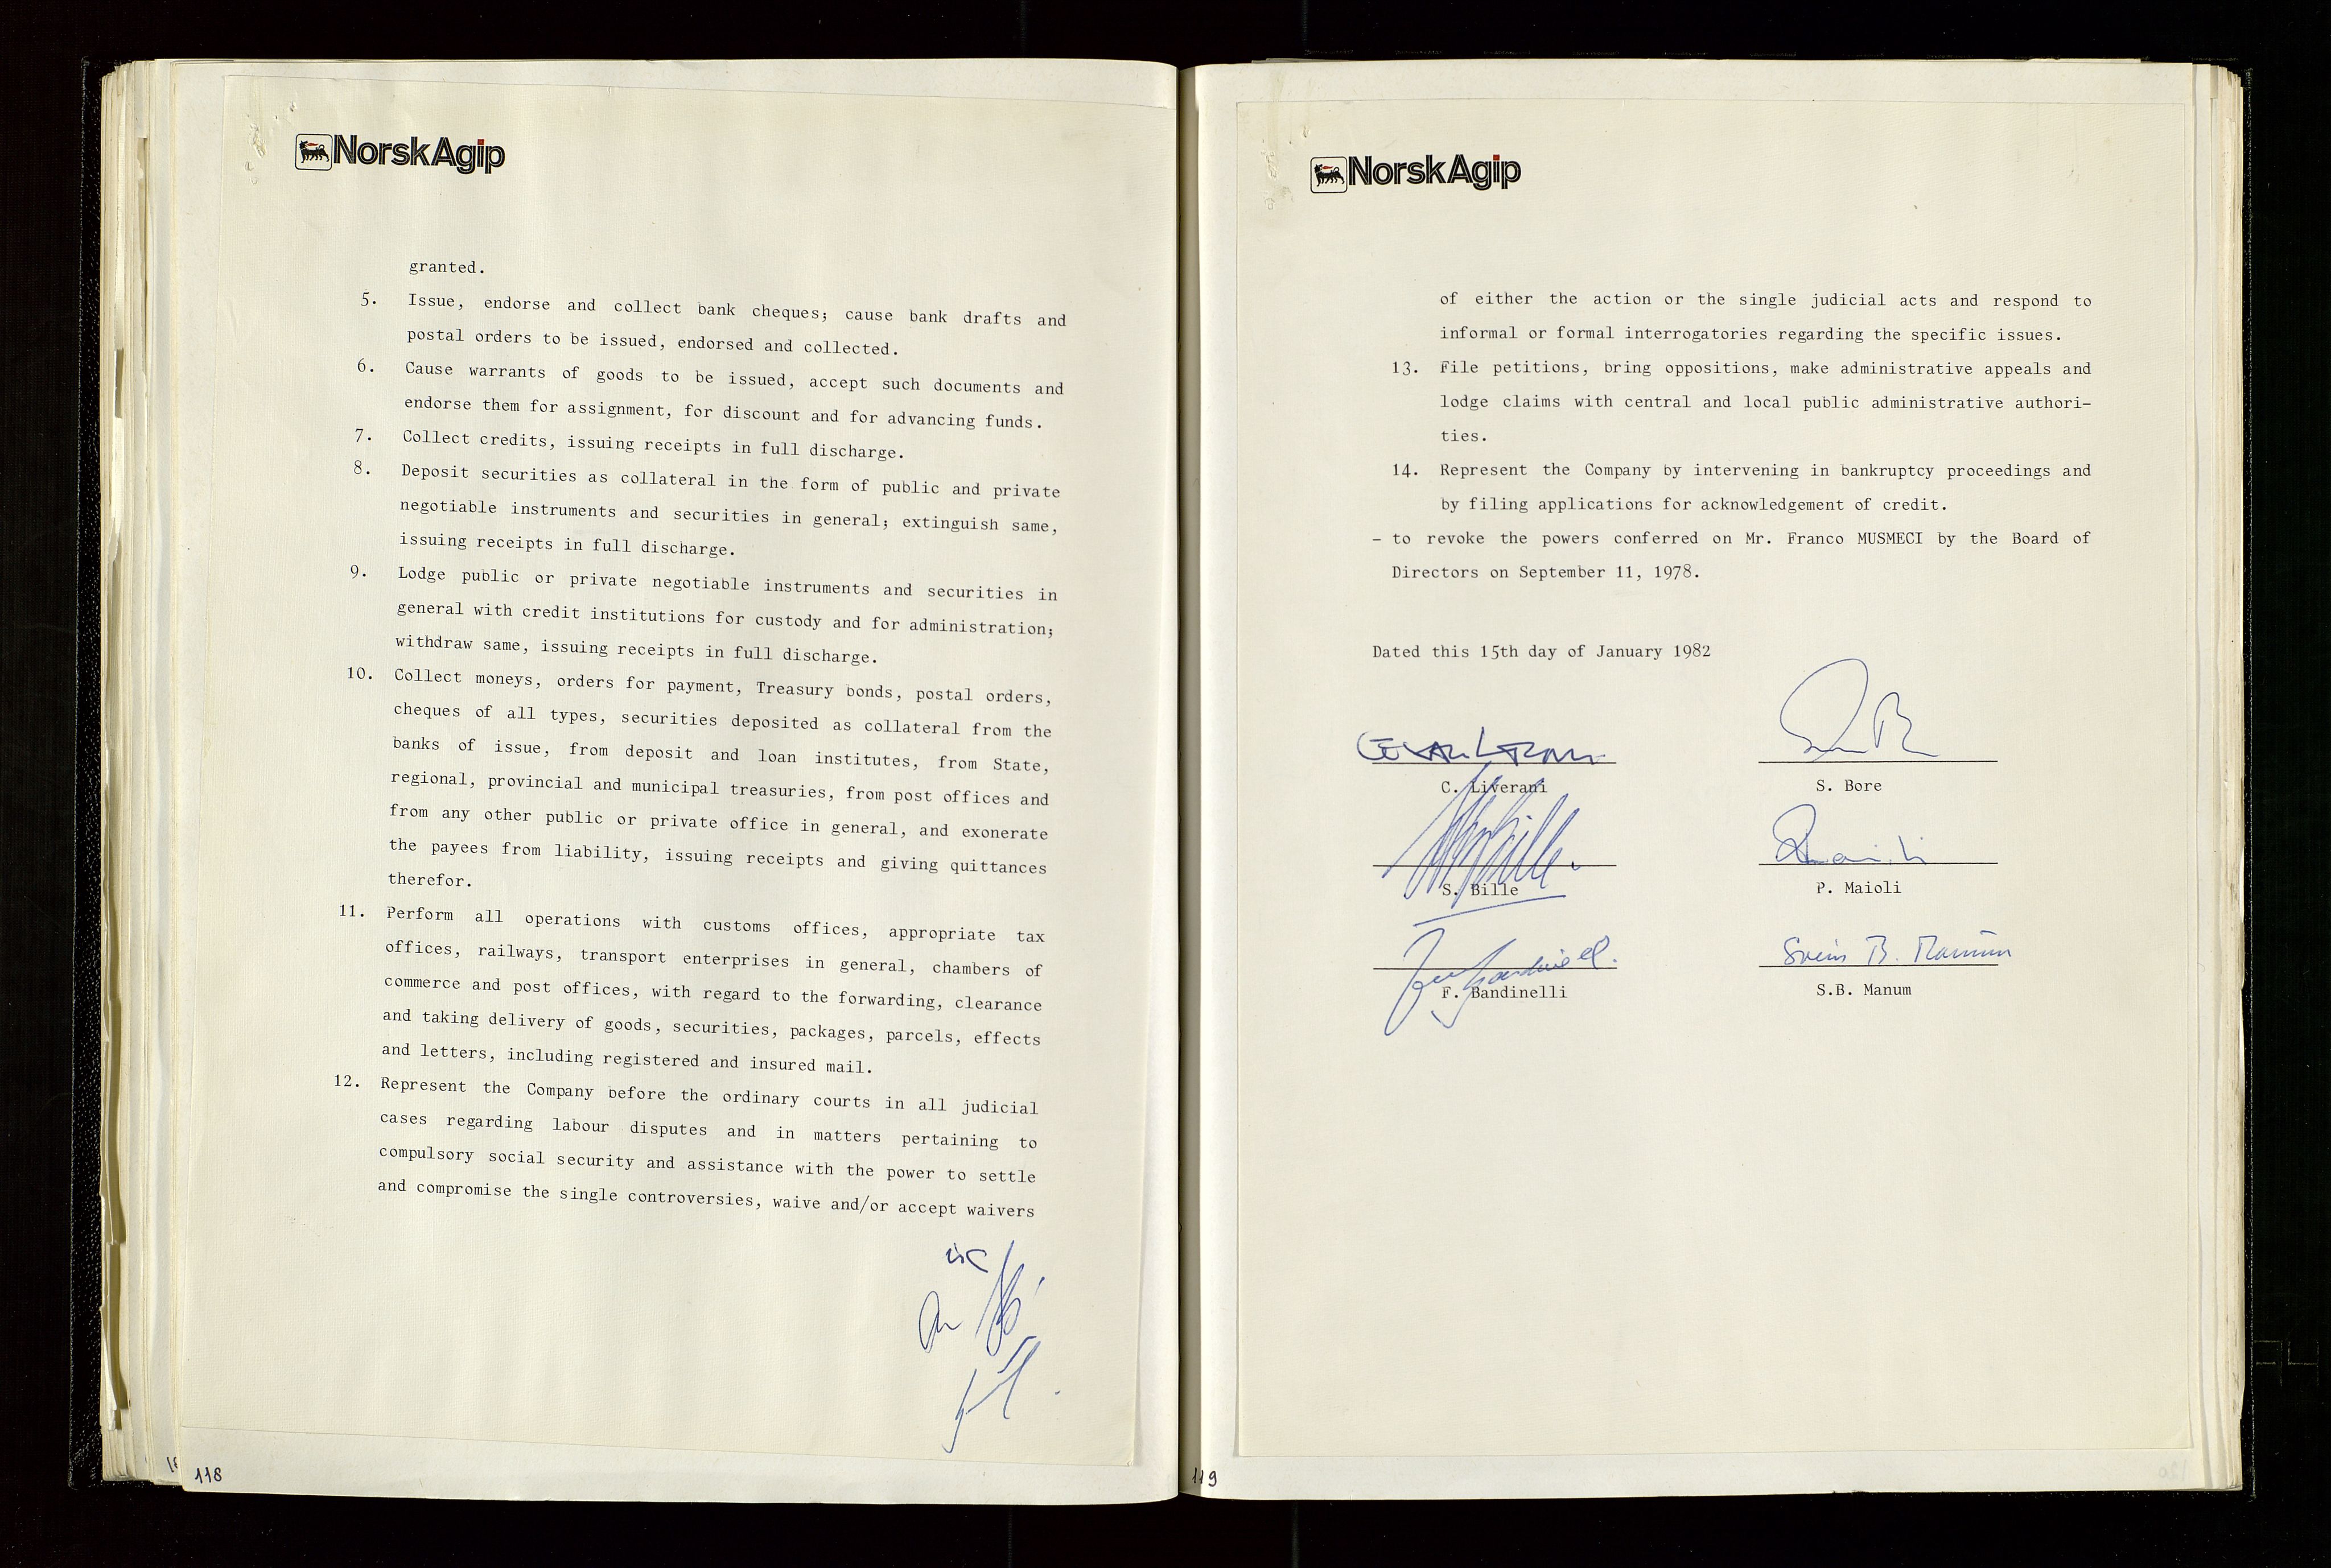 Pa 1583 - Norsk Agip AS, SAST/A-102138/A/Aa/L0003: Board of Directors meeting minutes, 1979-1983, p. 118-119